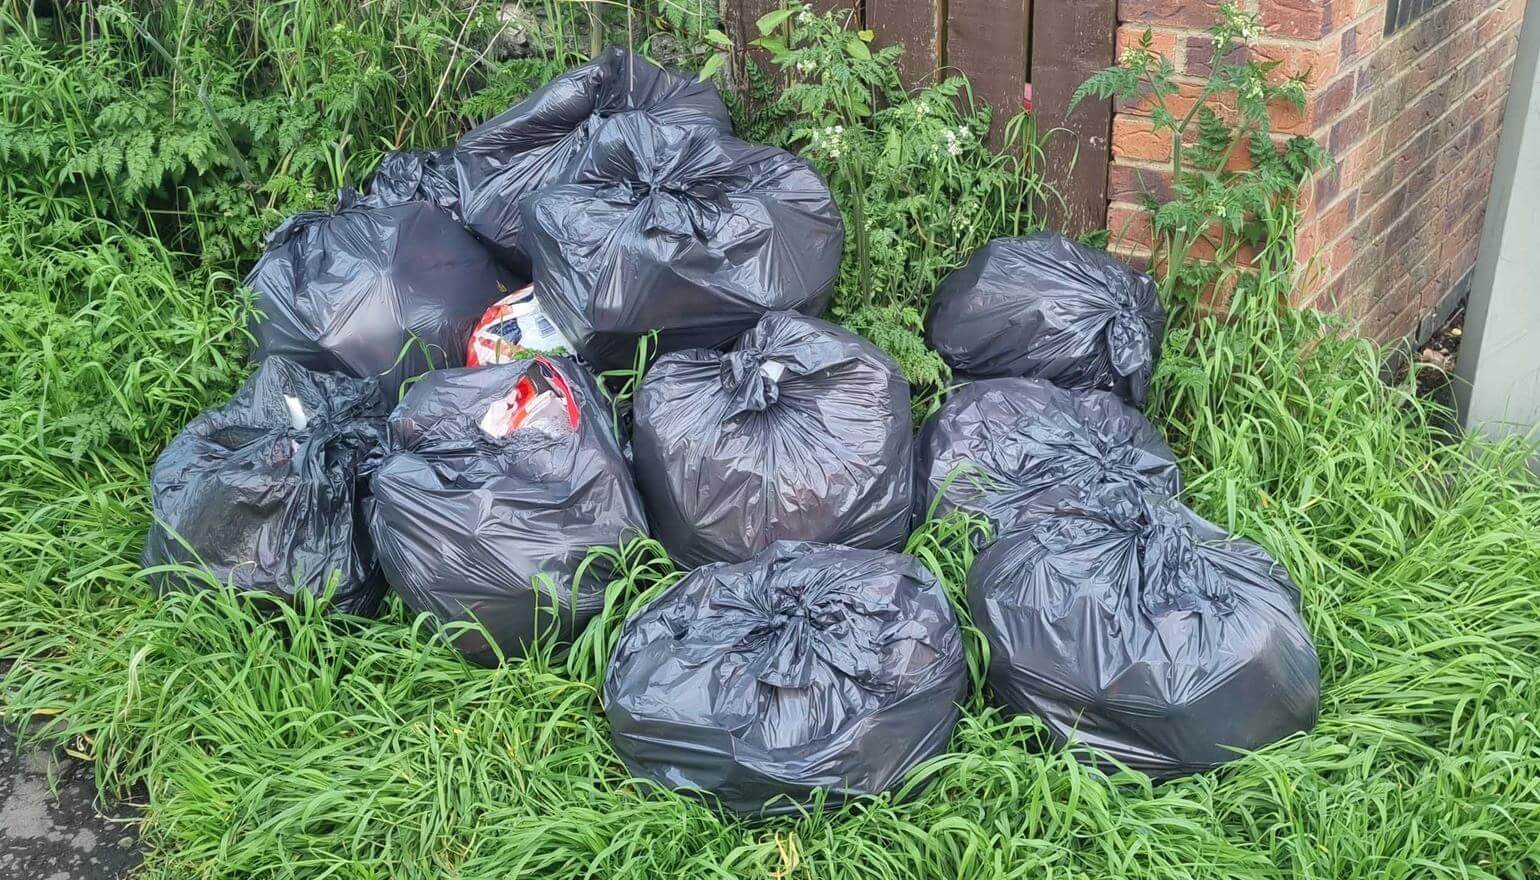 Householder fined for fly tipping